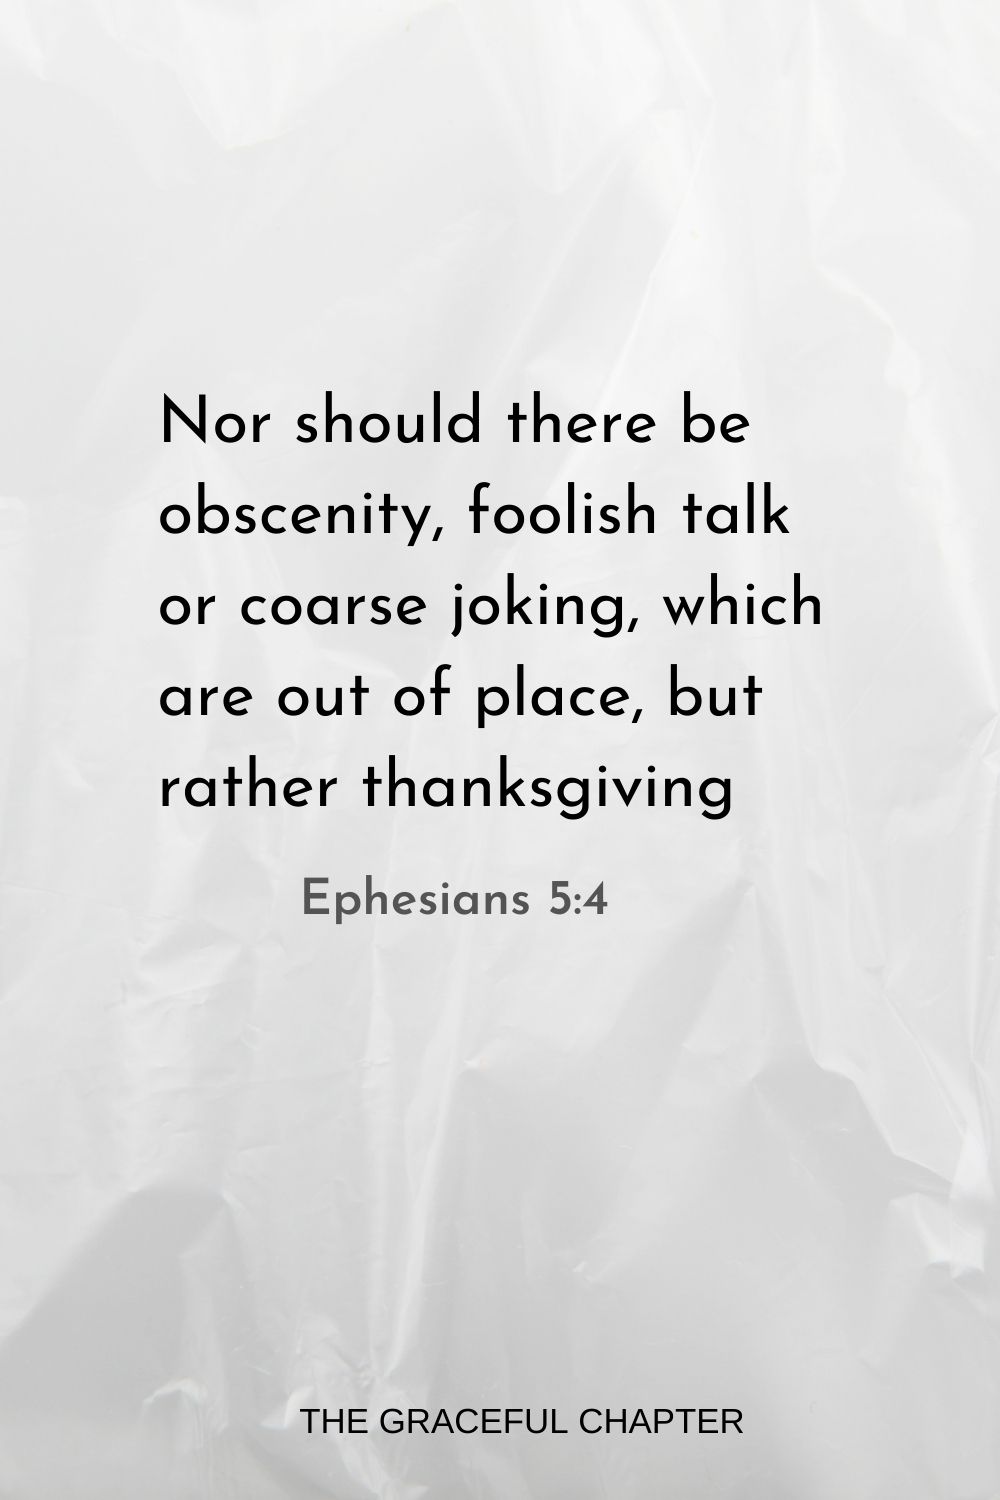 Nor should there be obscenity, foolish talk or coarse joking, which are out of place, but rather thanksgiving. Ephesians 5:4